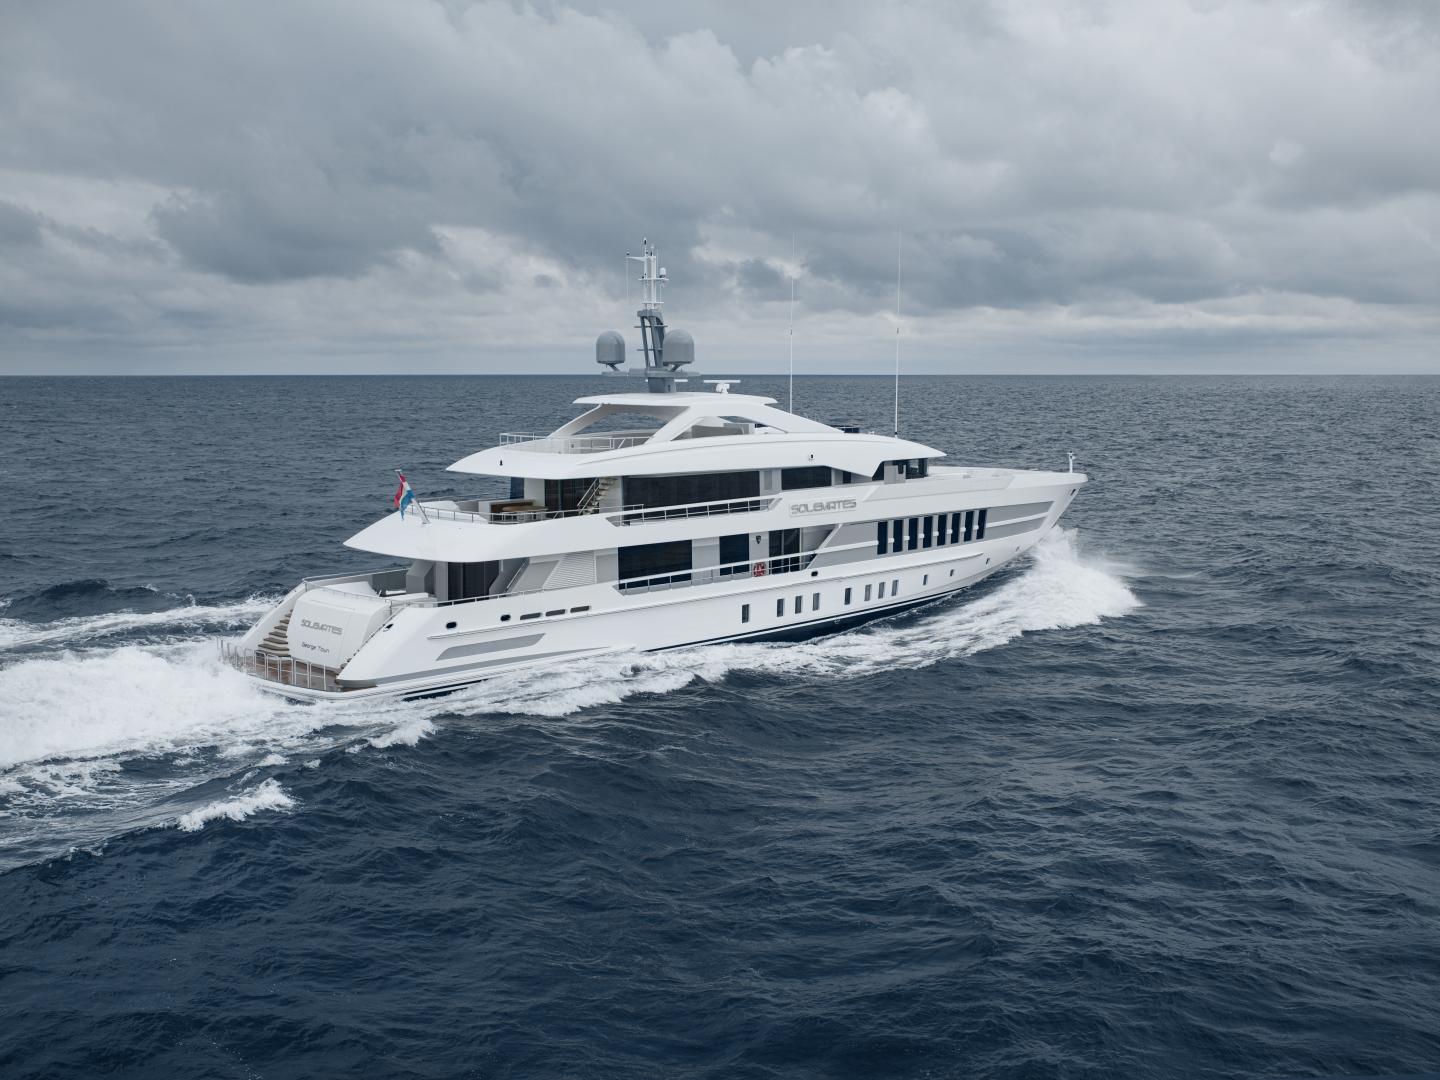 Heesen delivers YN 19055 Project Castor - now named Solemates